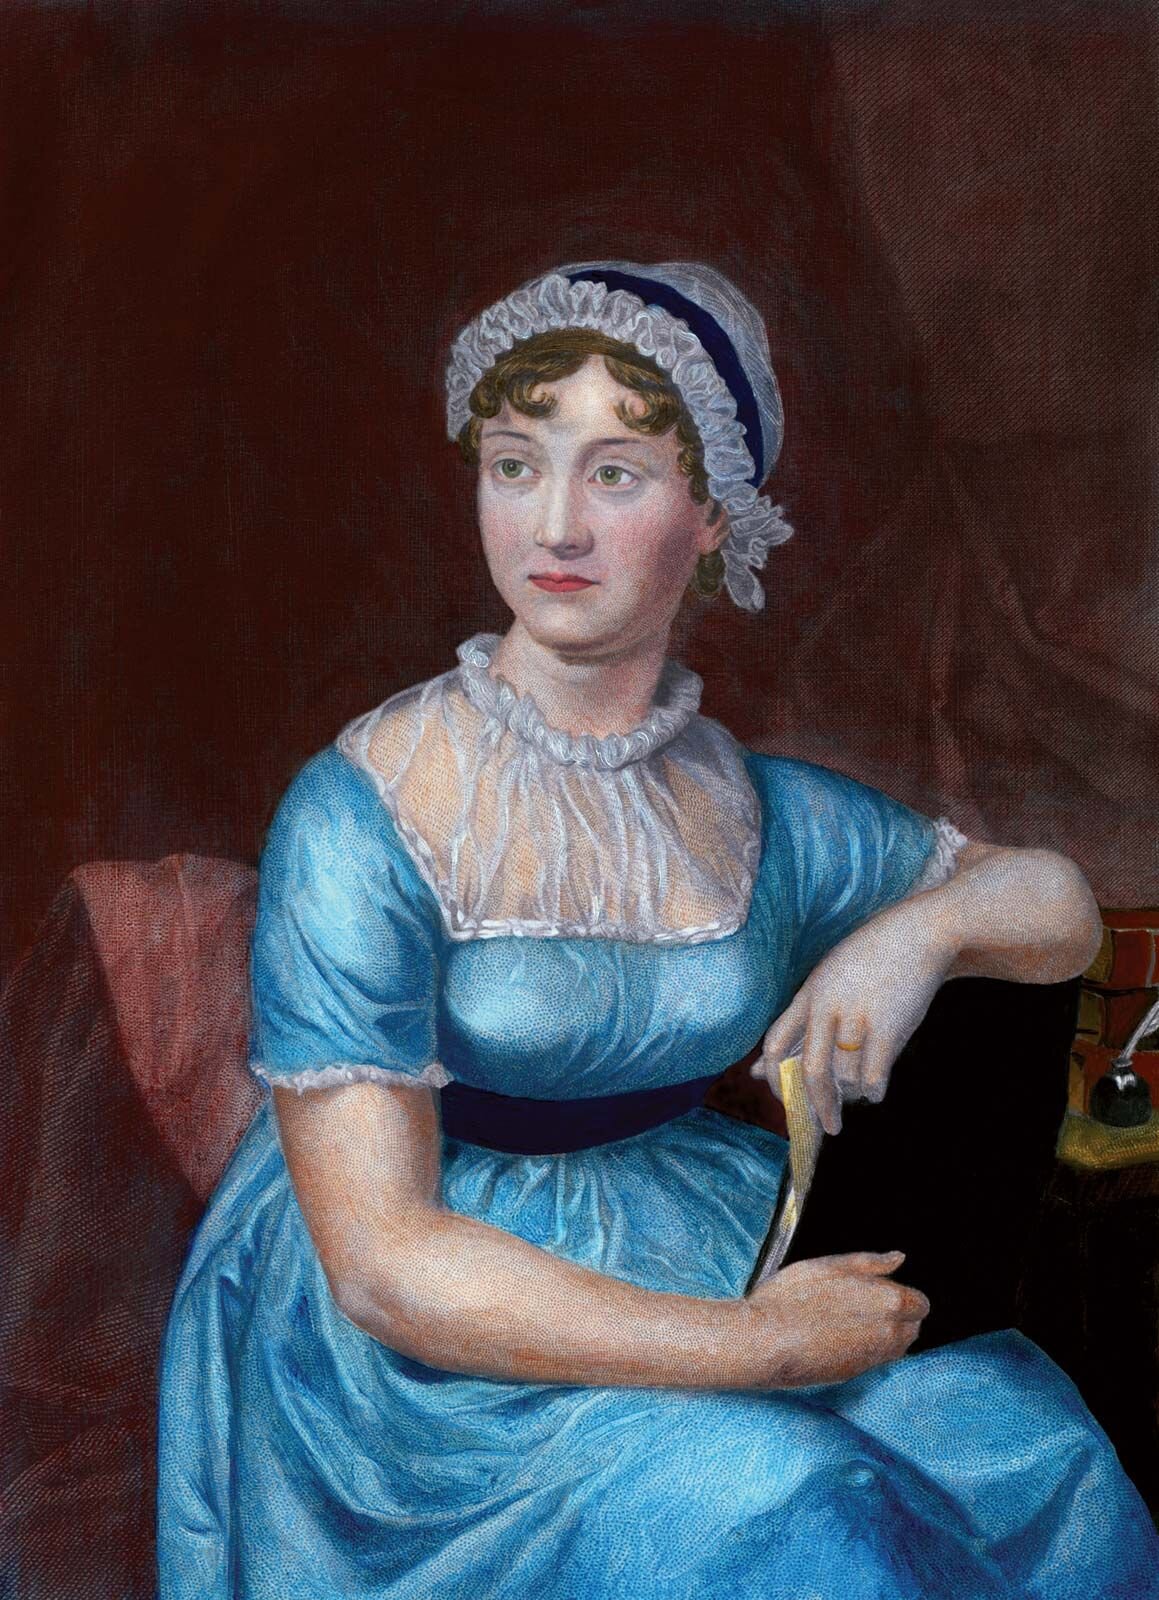 Jane Austen, an English novelist known for her witty social commentary